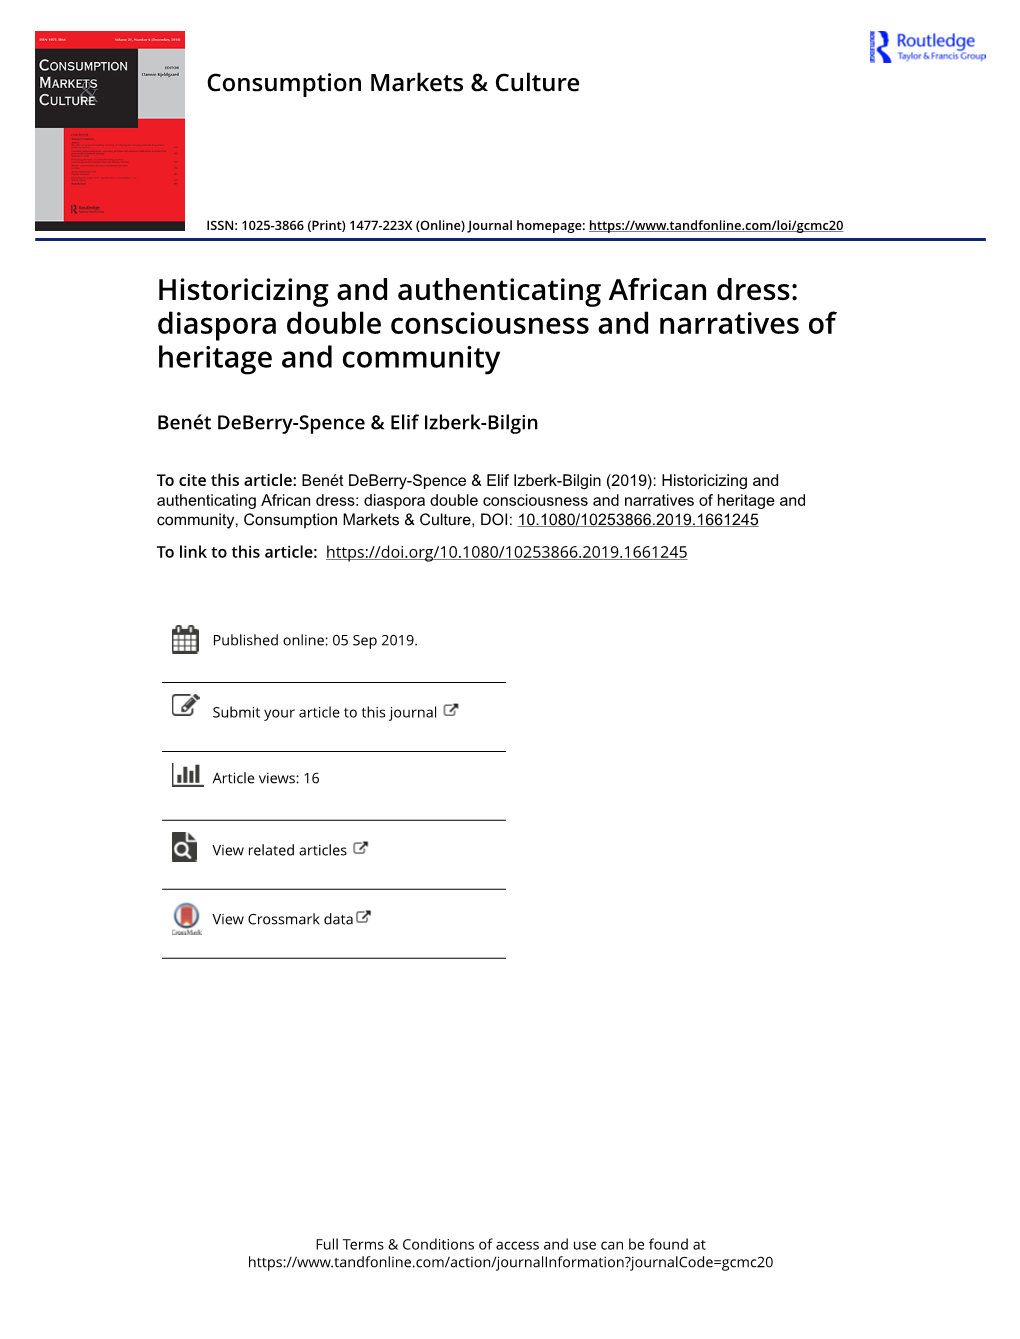 Historicizing and Authenticating African Dress: Diaspora Double Consciousness and Narratives of Heritage and Community